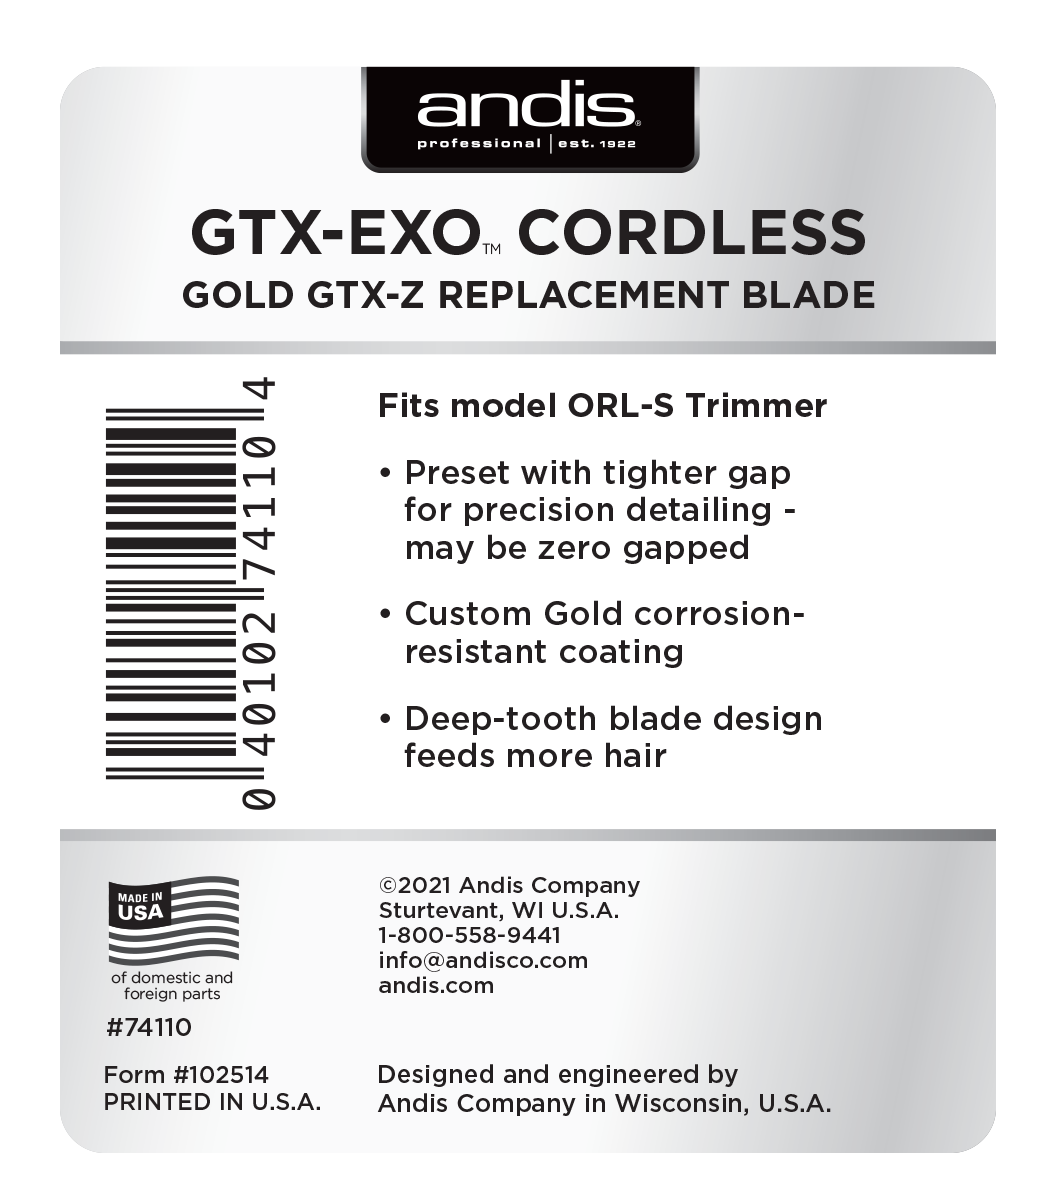 Andis 74110 GTX-EXO Cordless Gold GTX-Z Replacement Blade Back Packaging